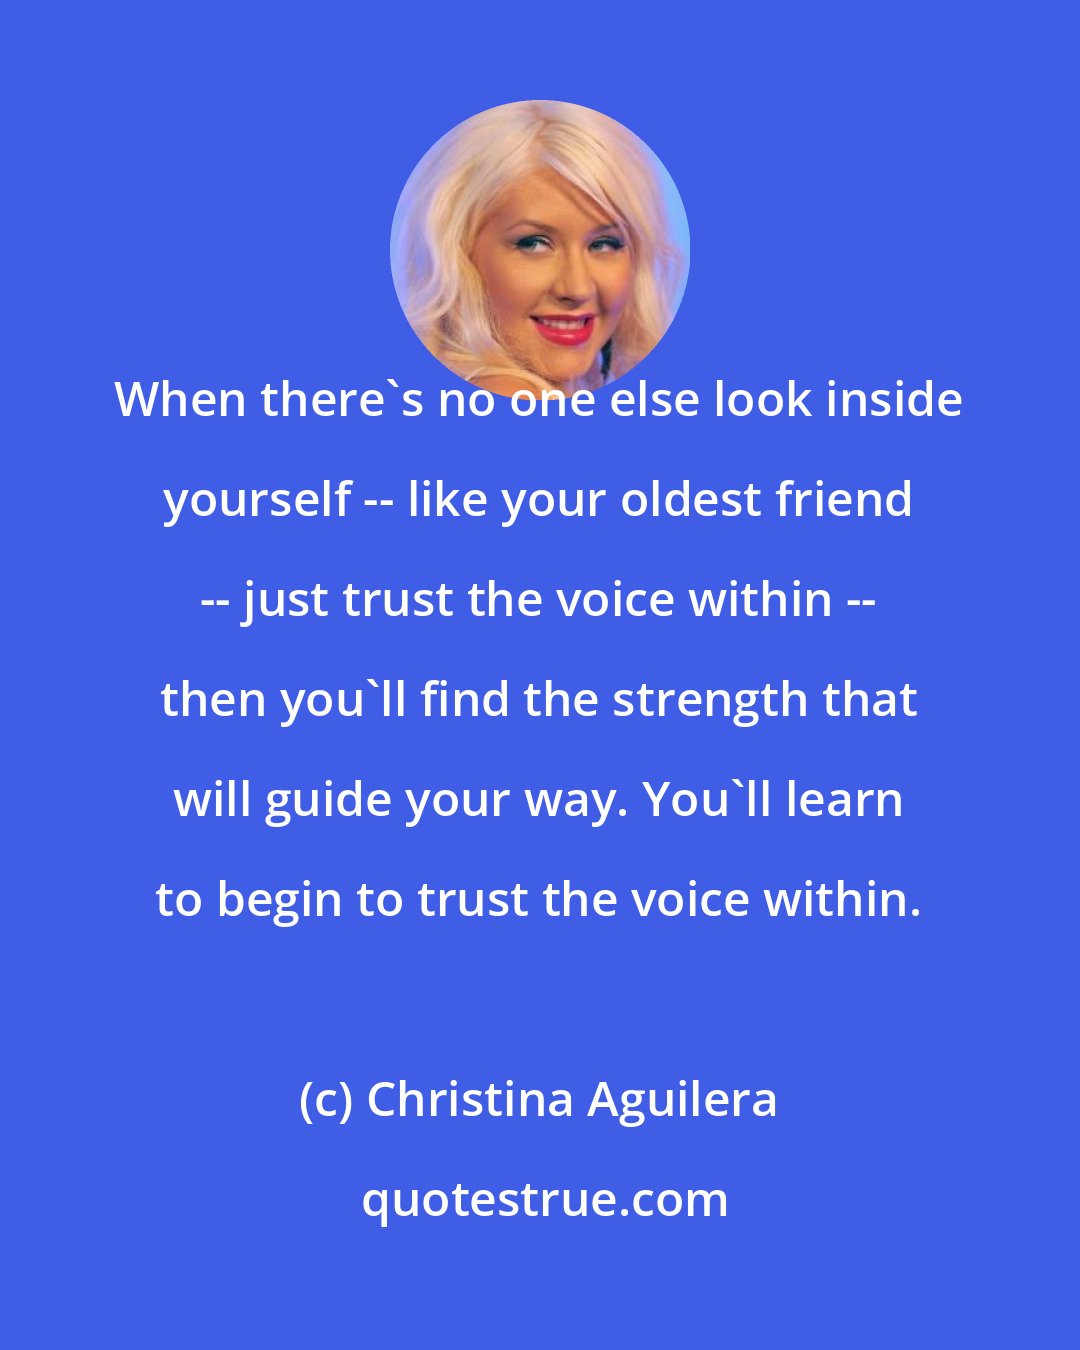 Christina Aguilera: When there's no one else look inside yourself -- like your oldest friend -- just trust the voice within -- then you'll find the strength that will guide your way. You'll learn to begin to trust the voice within.